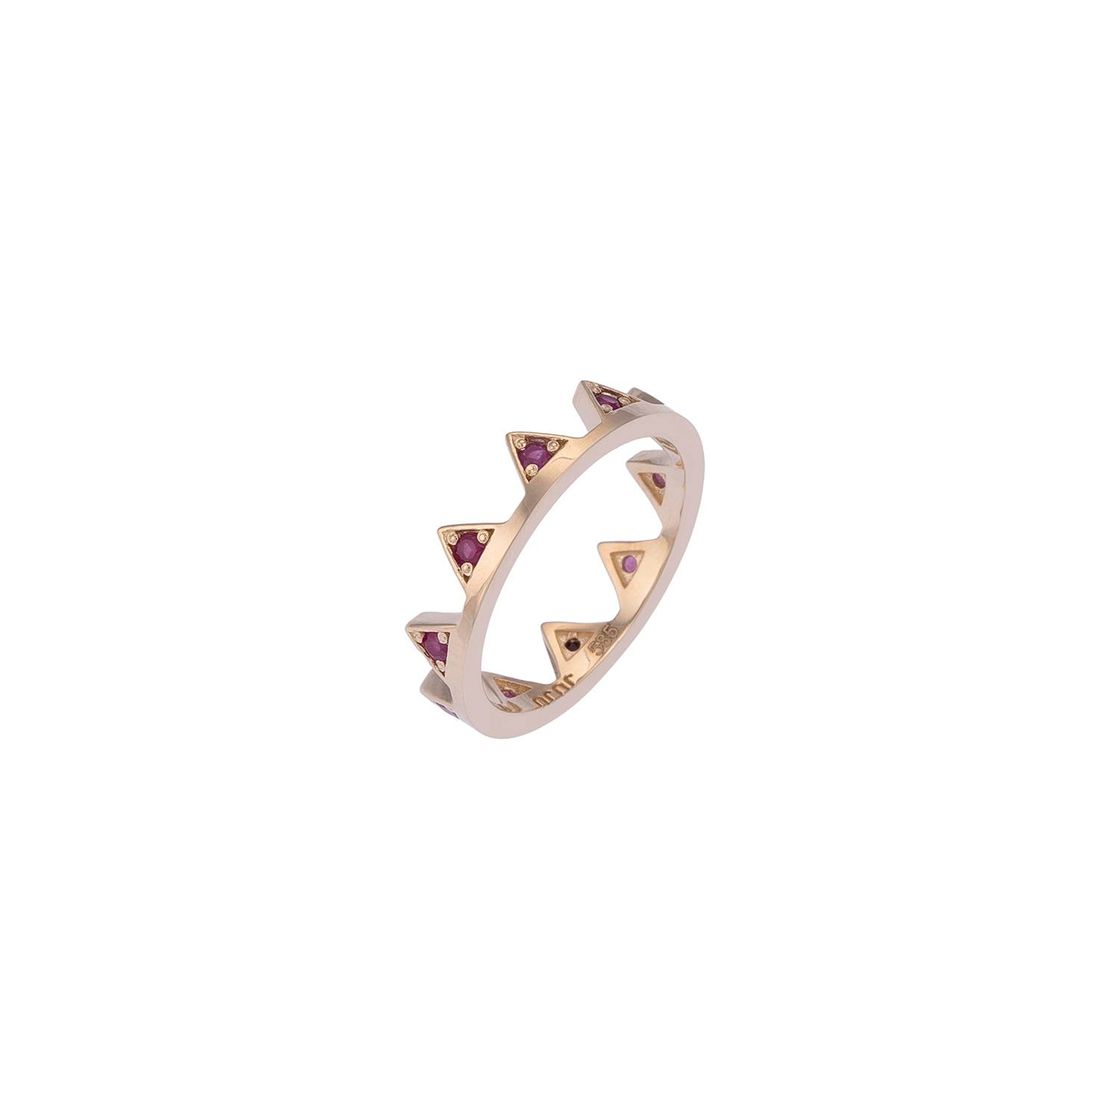 Spice Gold Ring with Ruby Stones